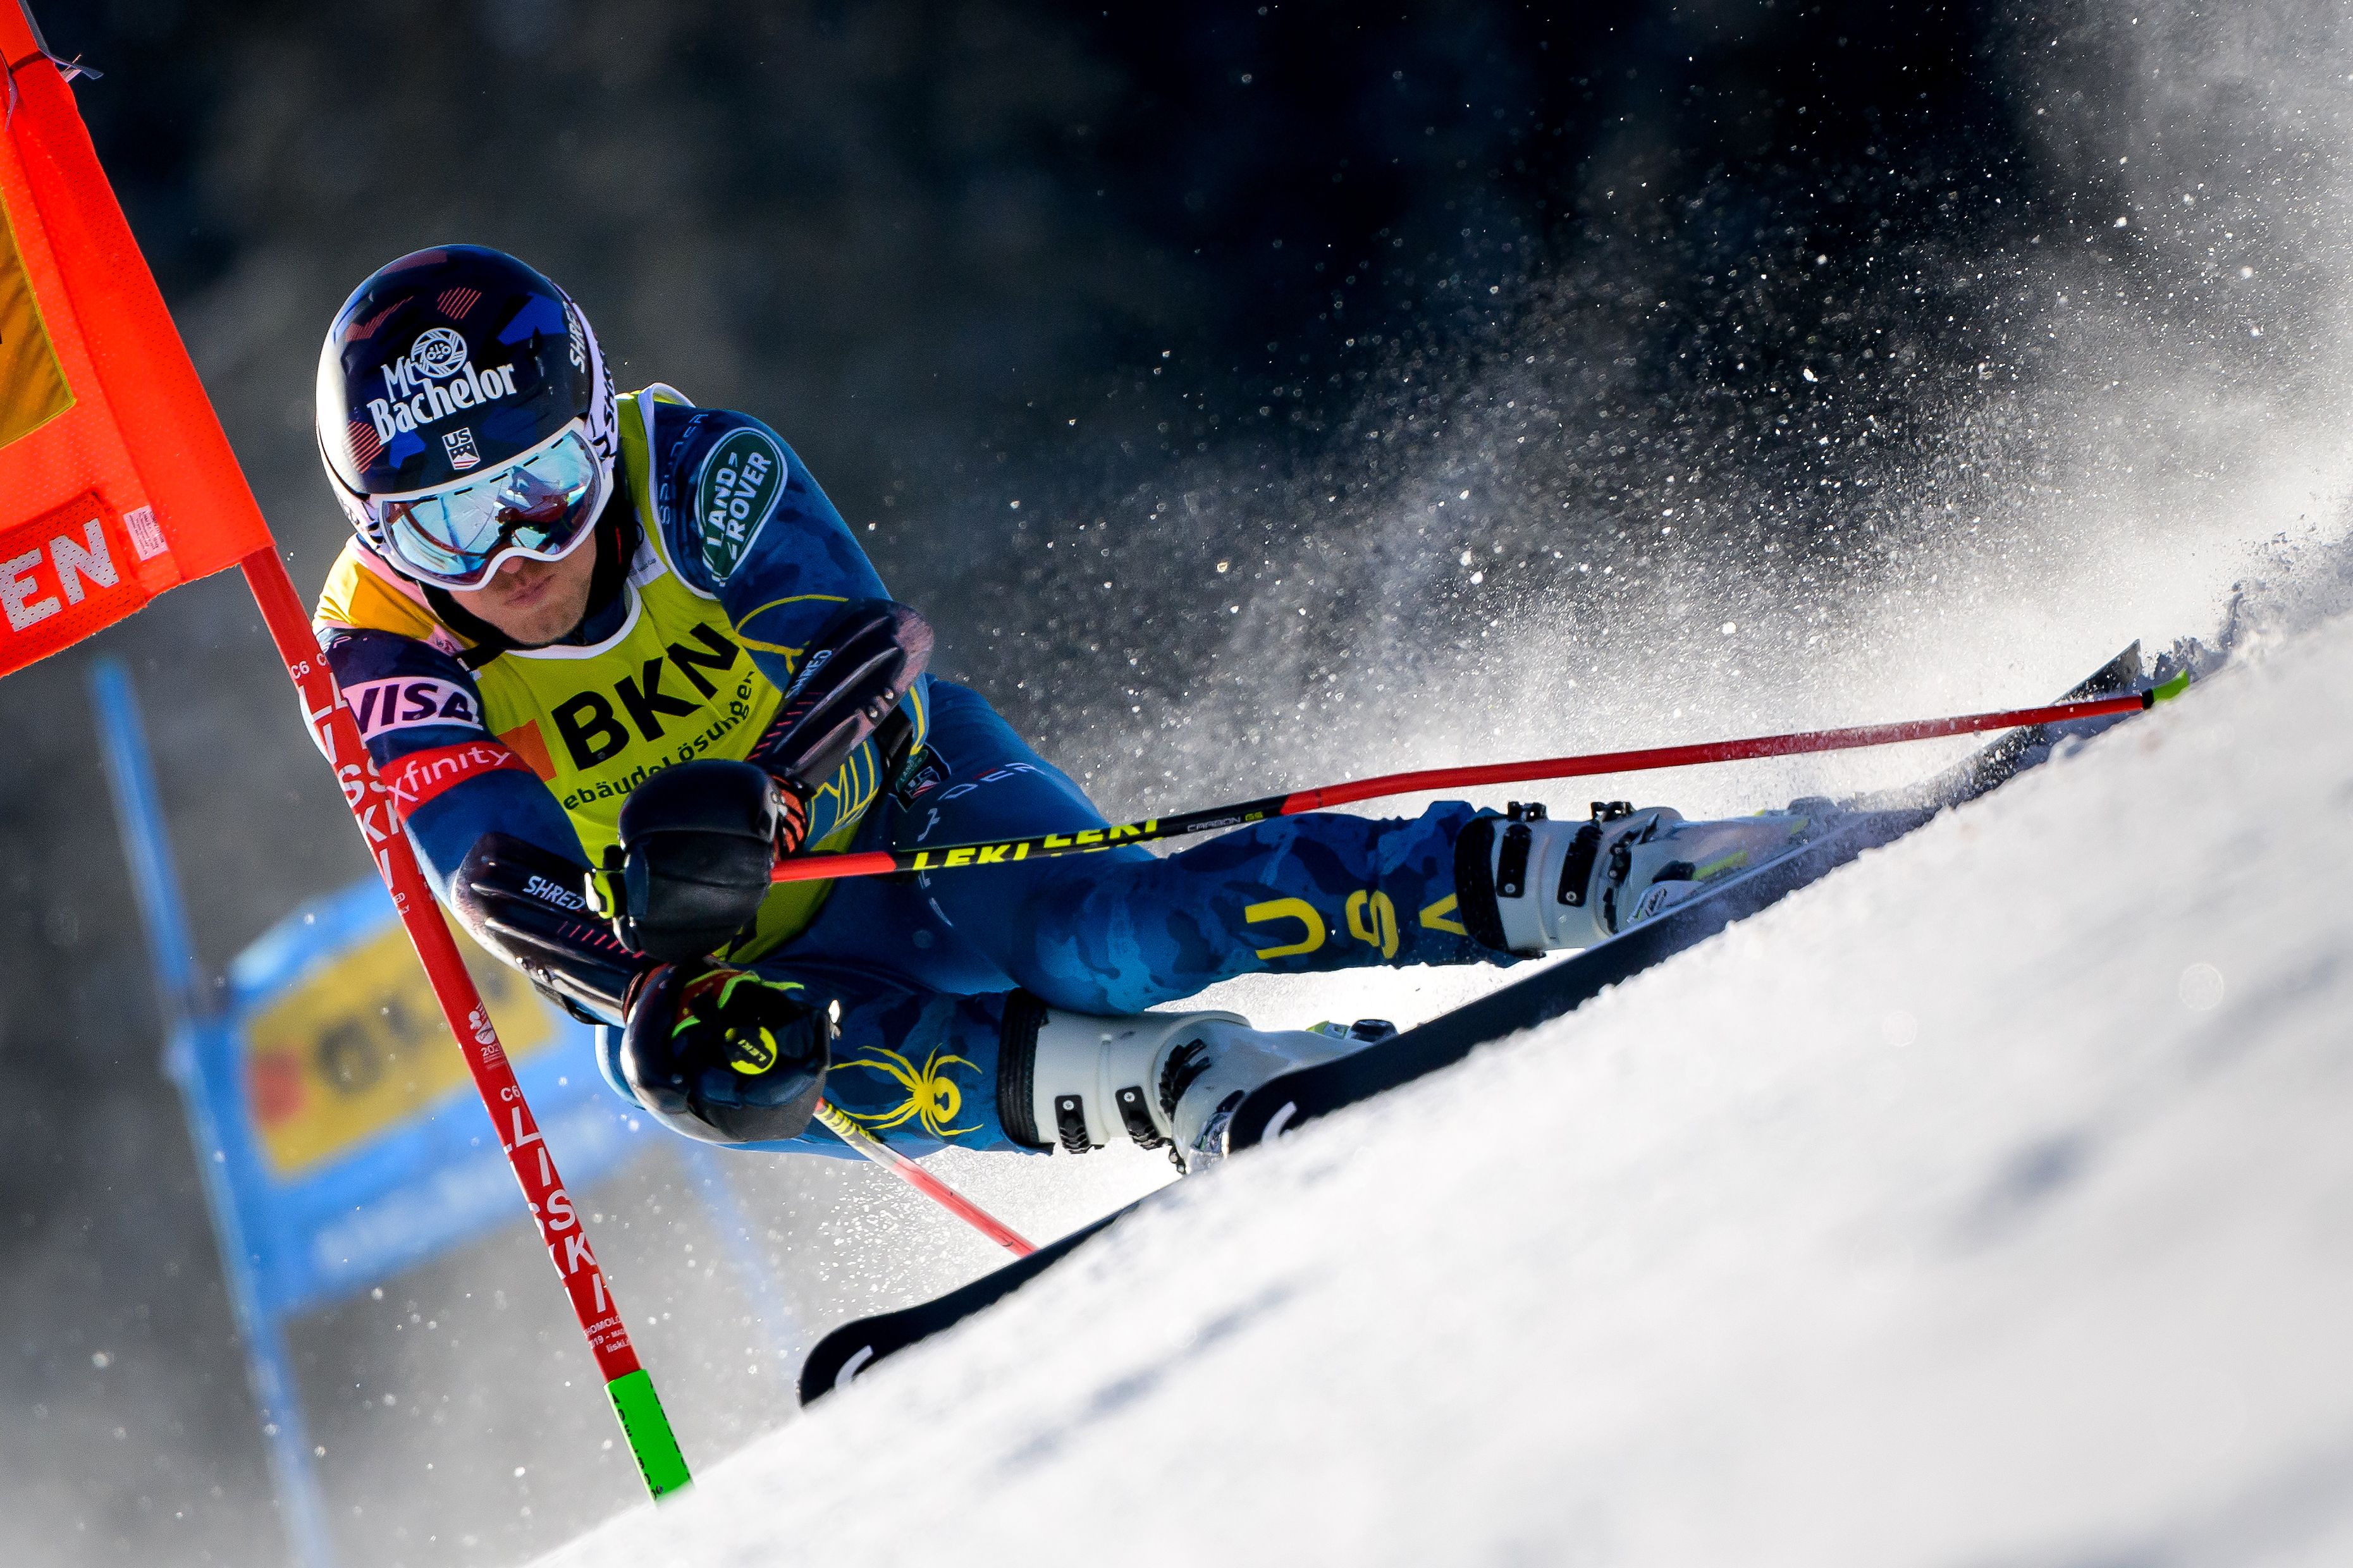 Ford Top 10 in Adelboden; Career-Best GS Finish for Radamus